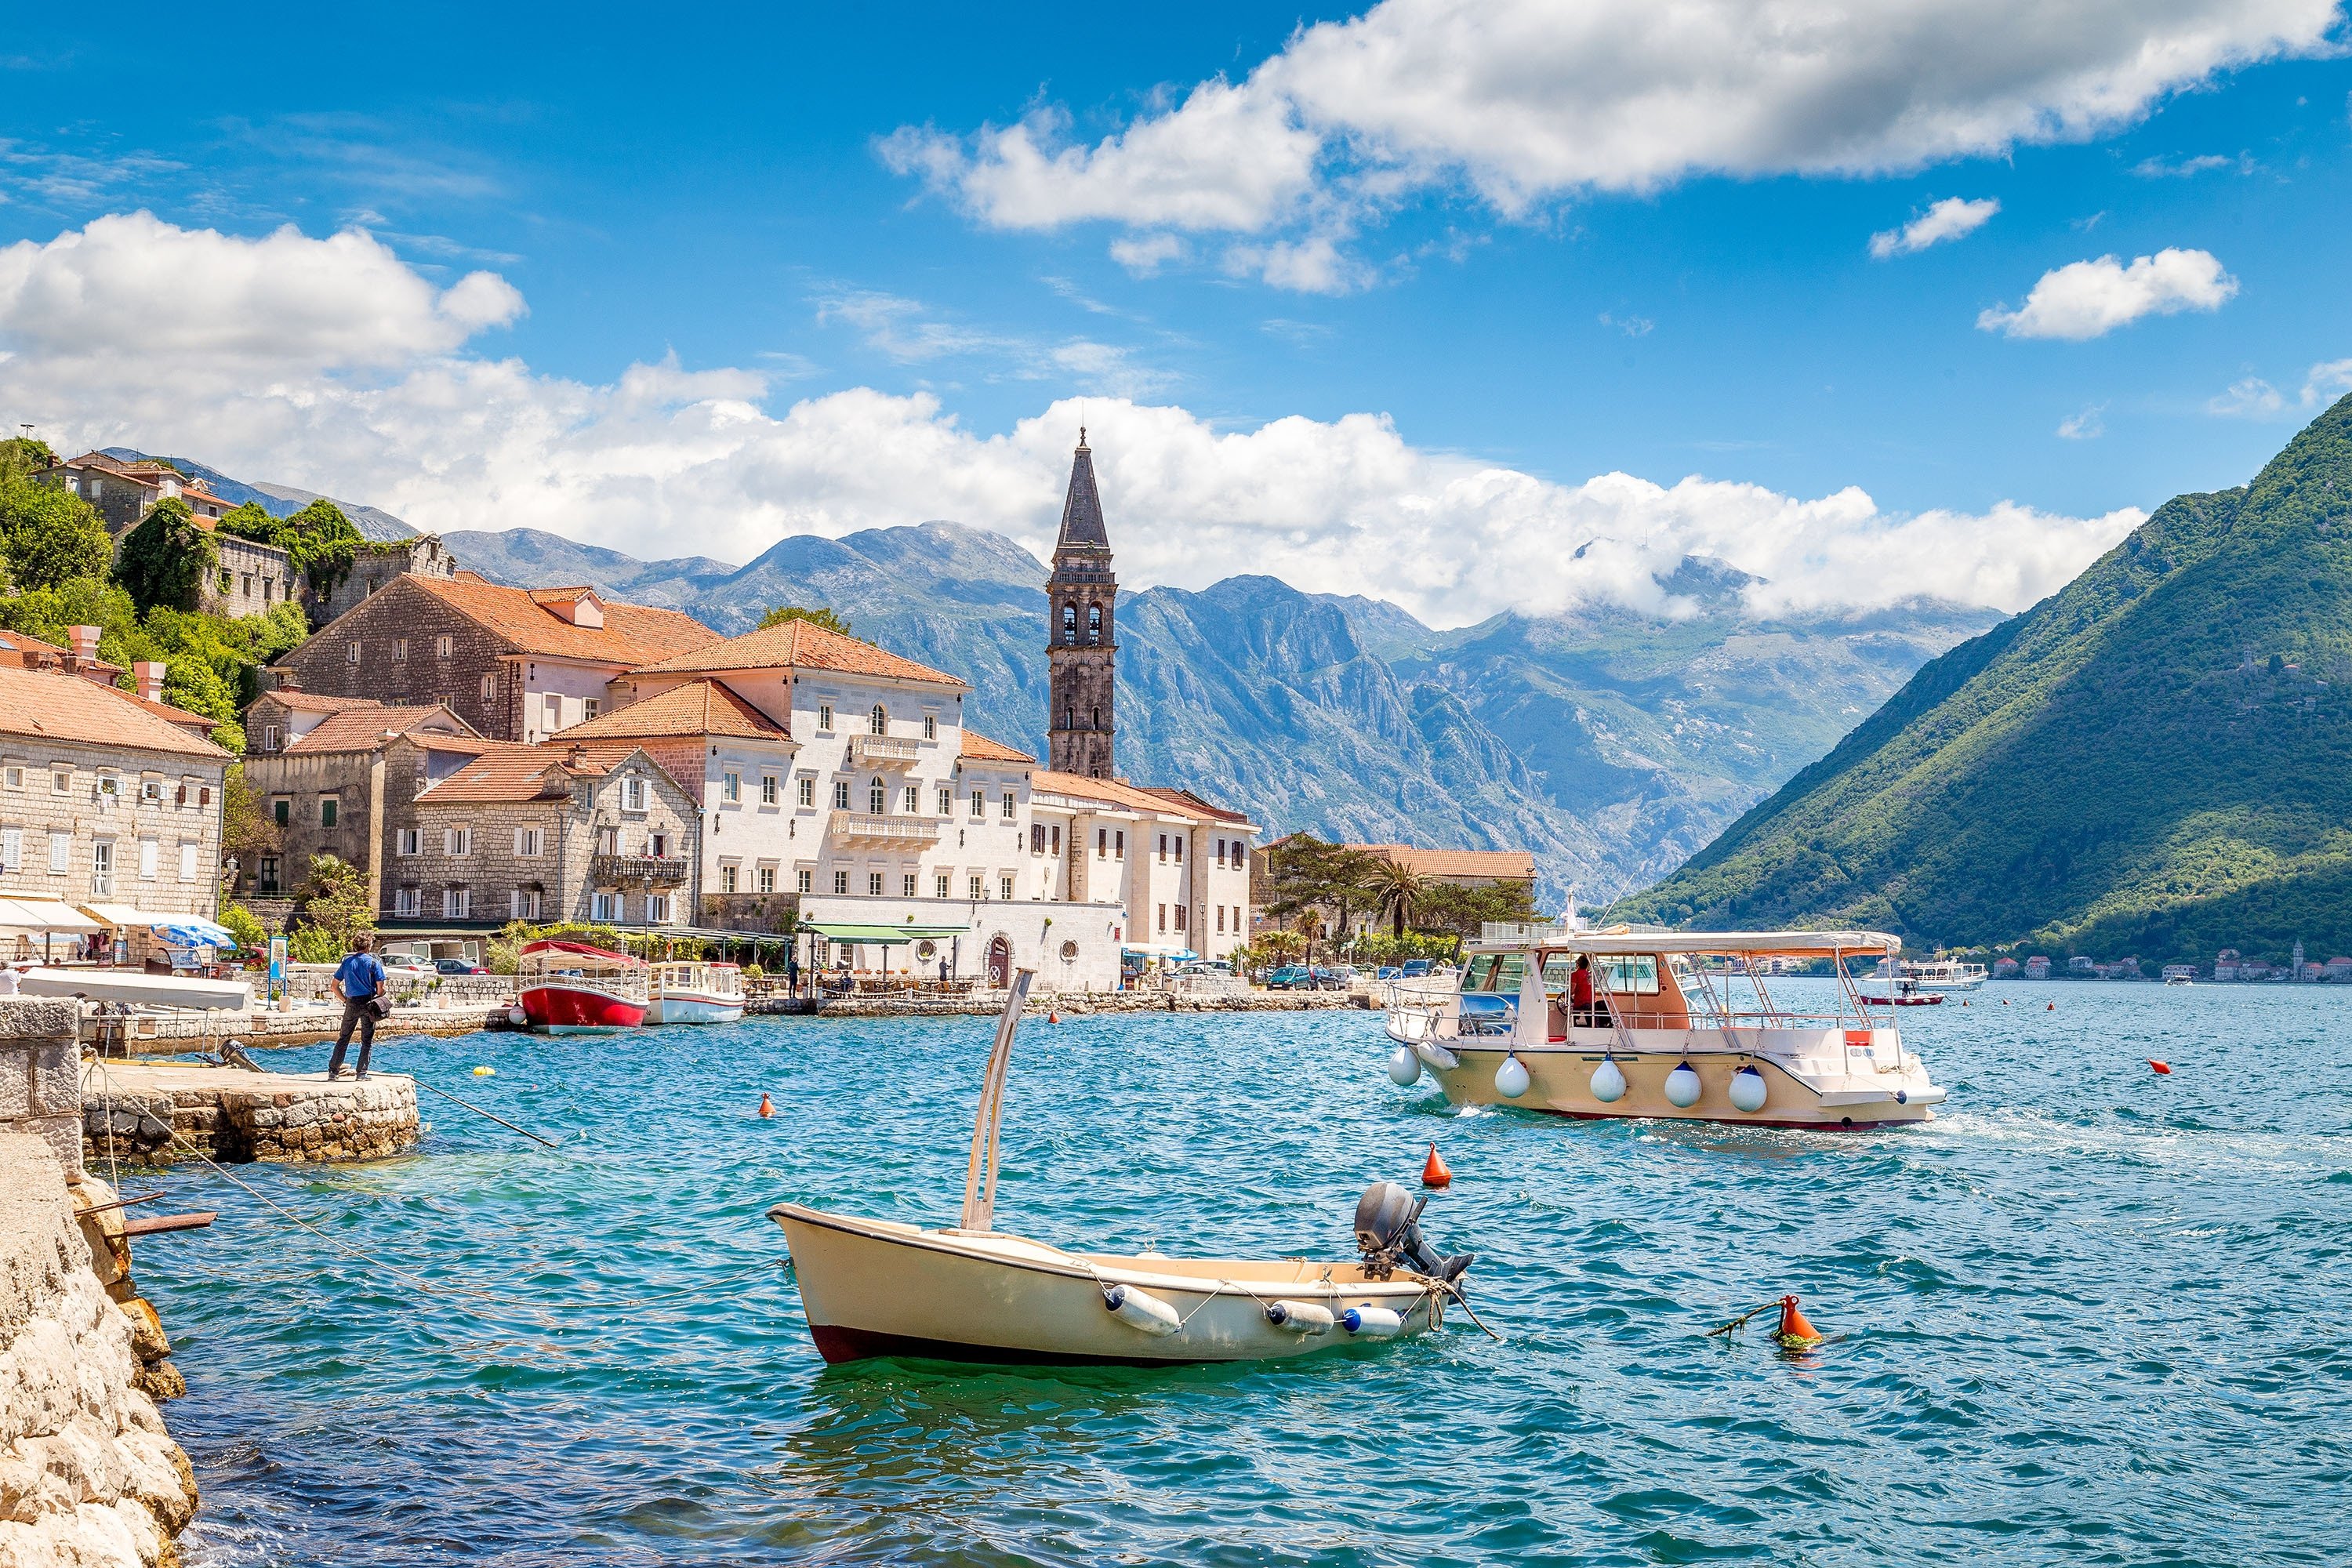 Small boats approach the scenic coast of the historic town of Perast, situated at the famous Bay of Kotor, Montenegro. (Shutterstock Photo)